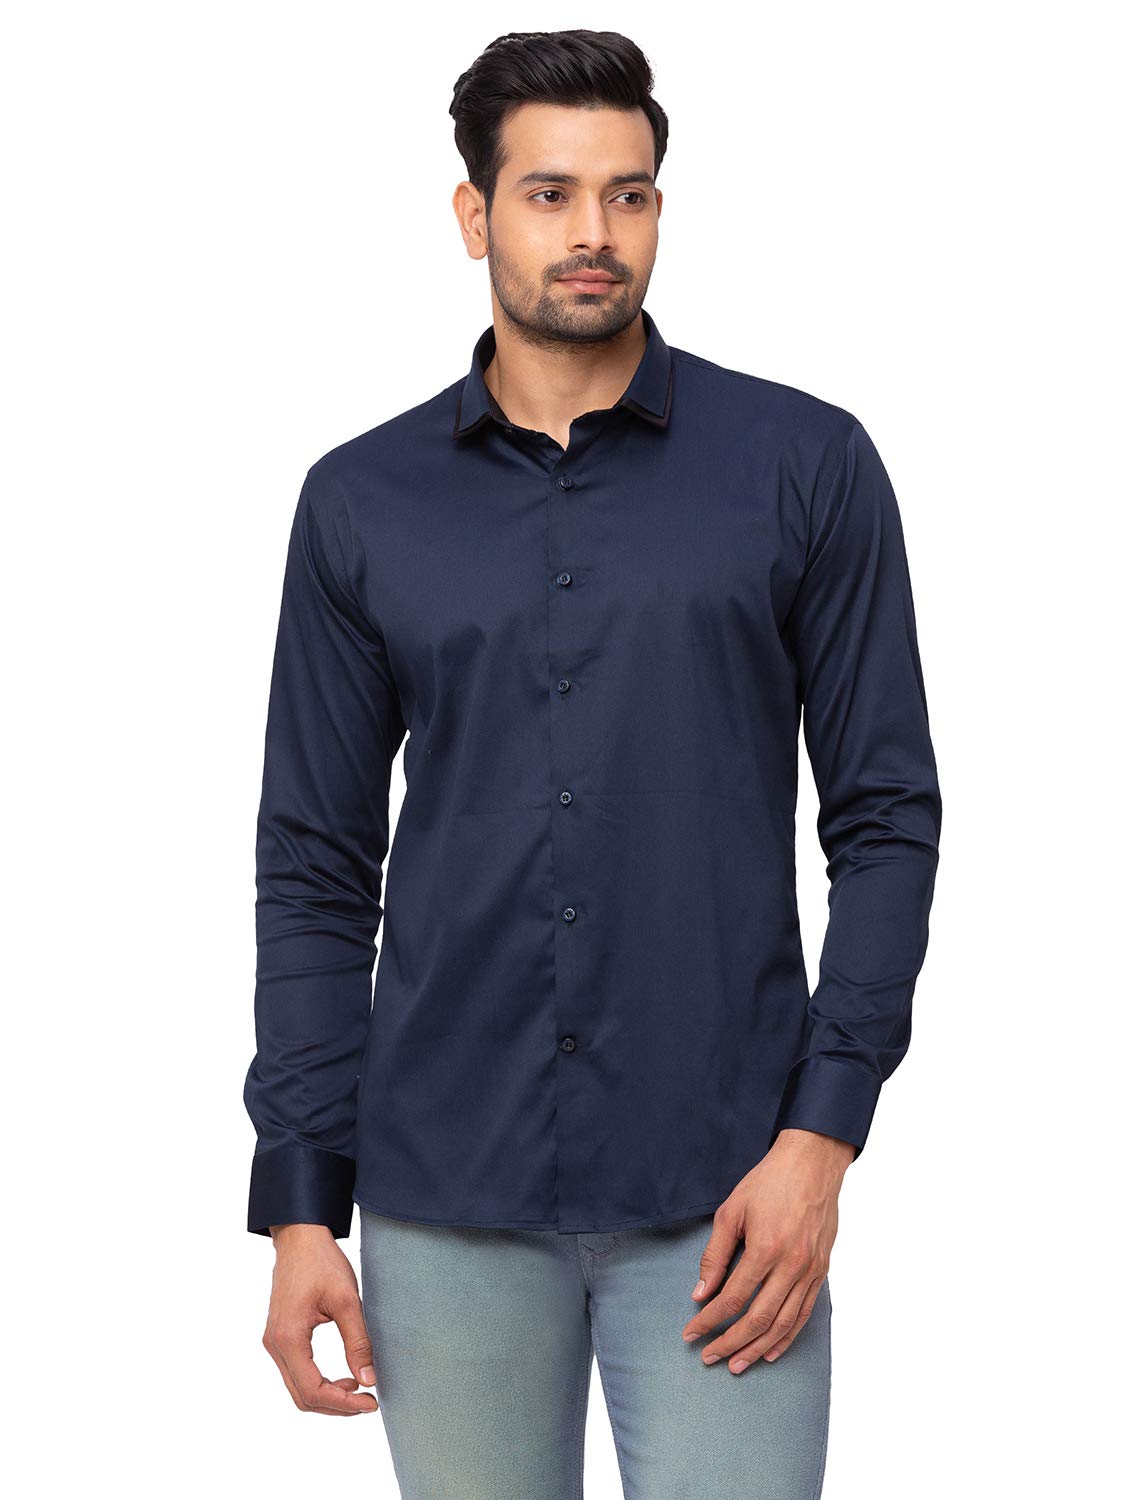 Navy Blue Double Collared Casual Shirt